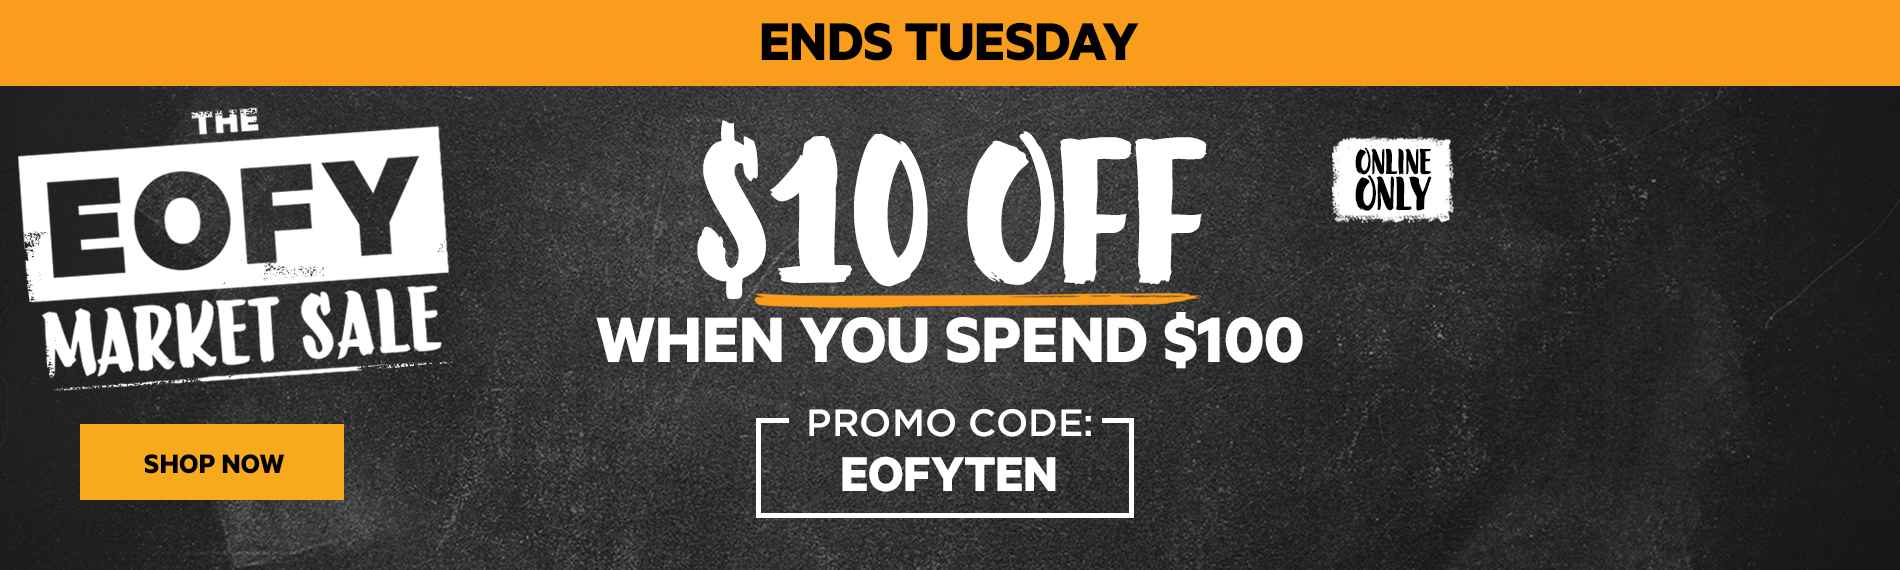 $10 OFF when you spend $100